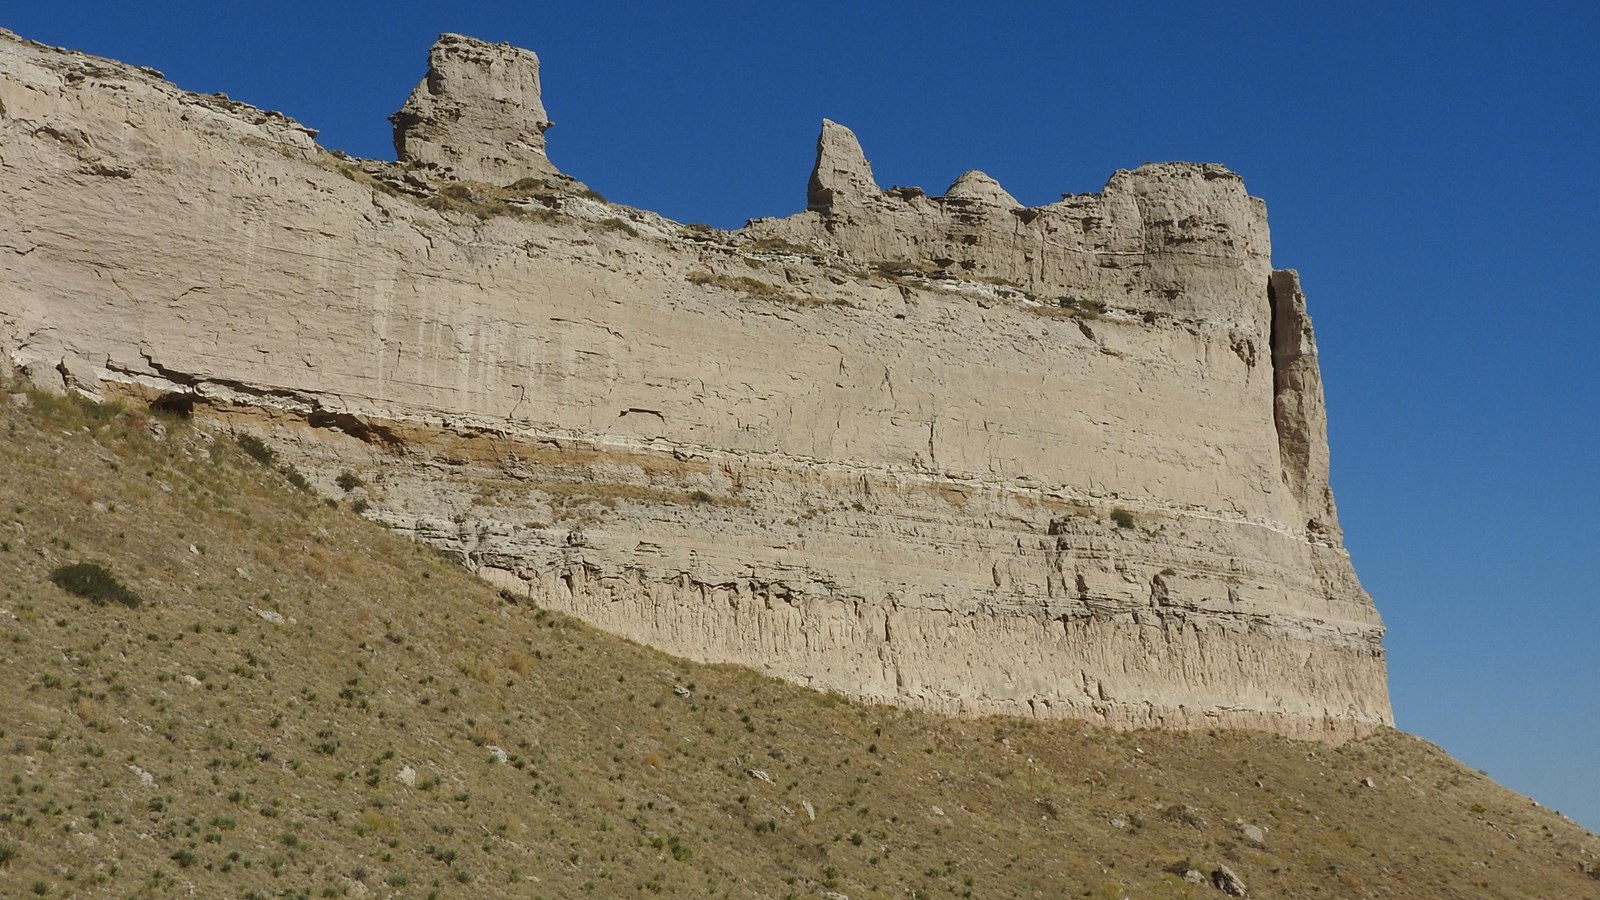 A large rock formation with visible strata and large chunks of rock at its base. 